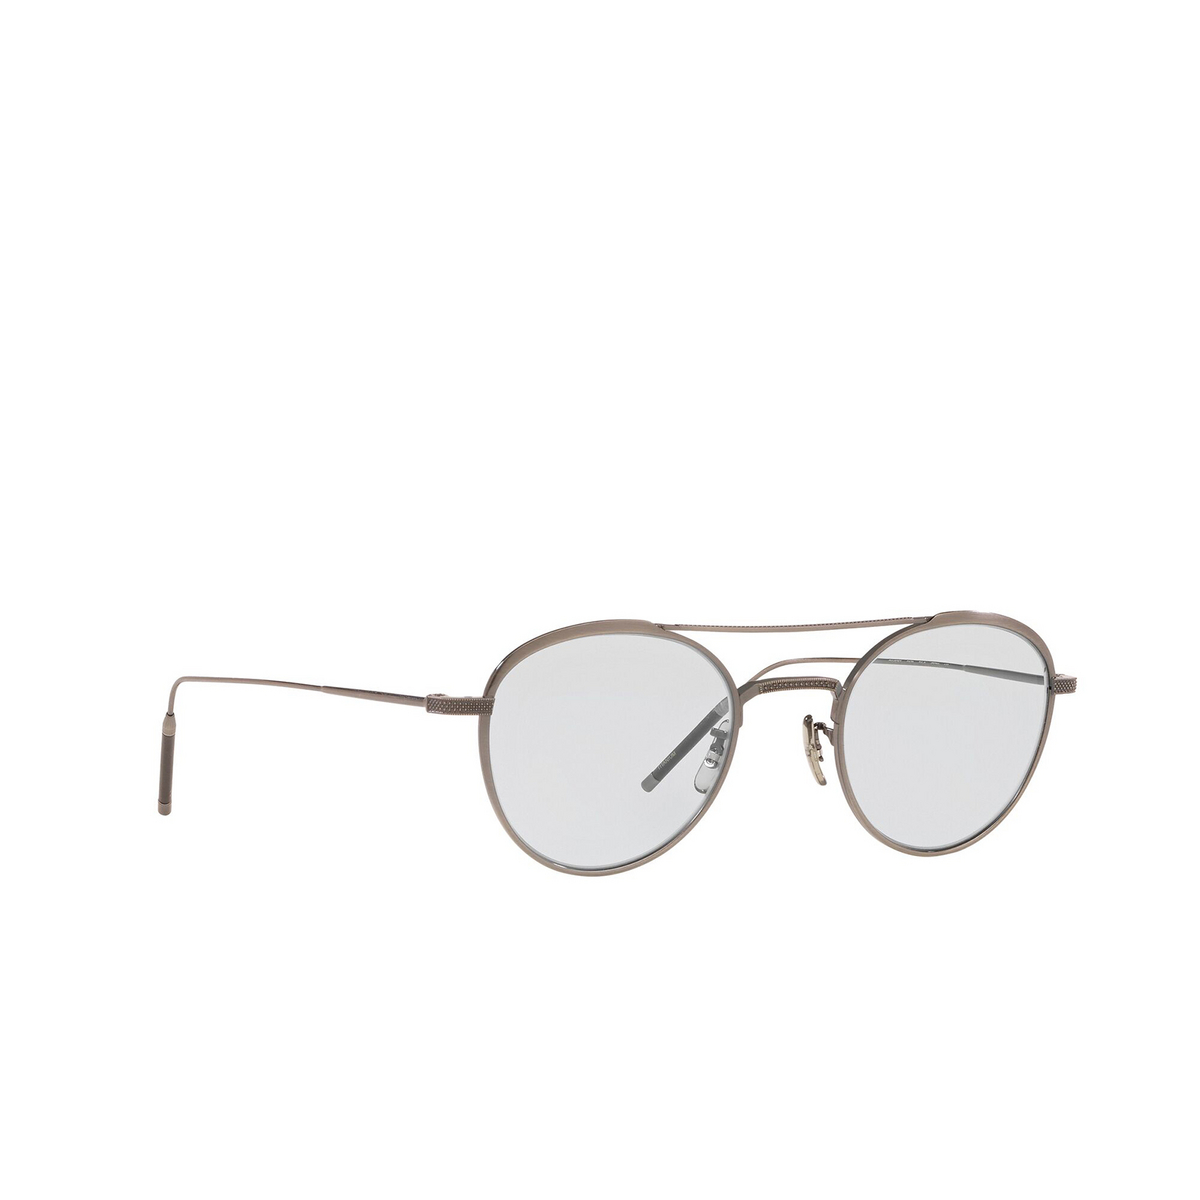 Oliver Peoples® Round Eyeglasses: Tk-2 OV1275T color Pewter 5076 - three-quarters view.